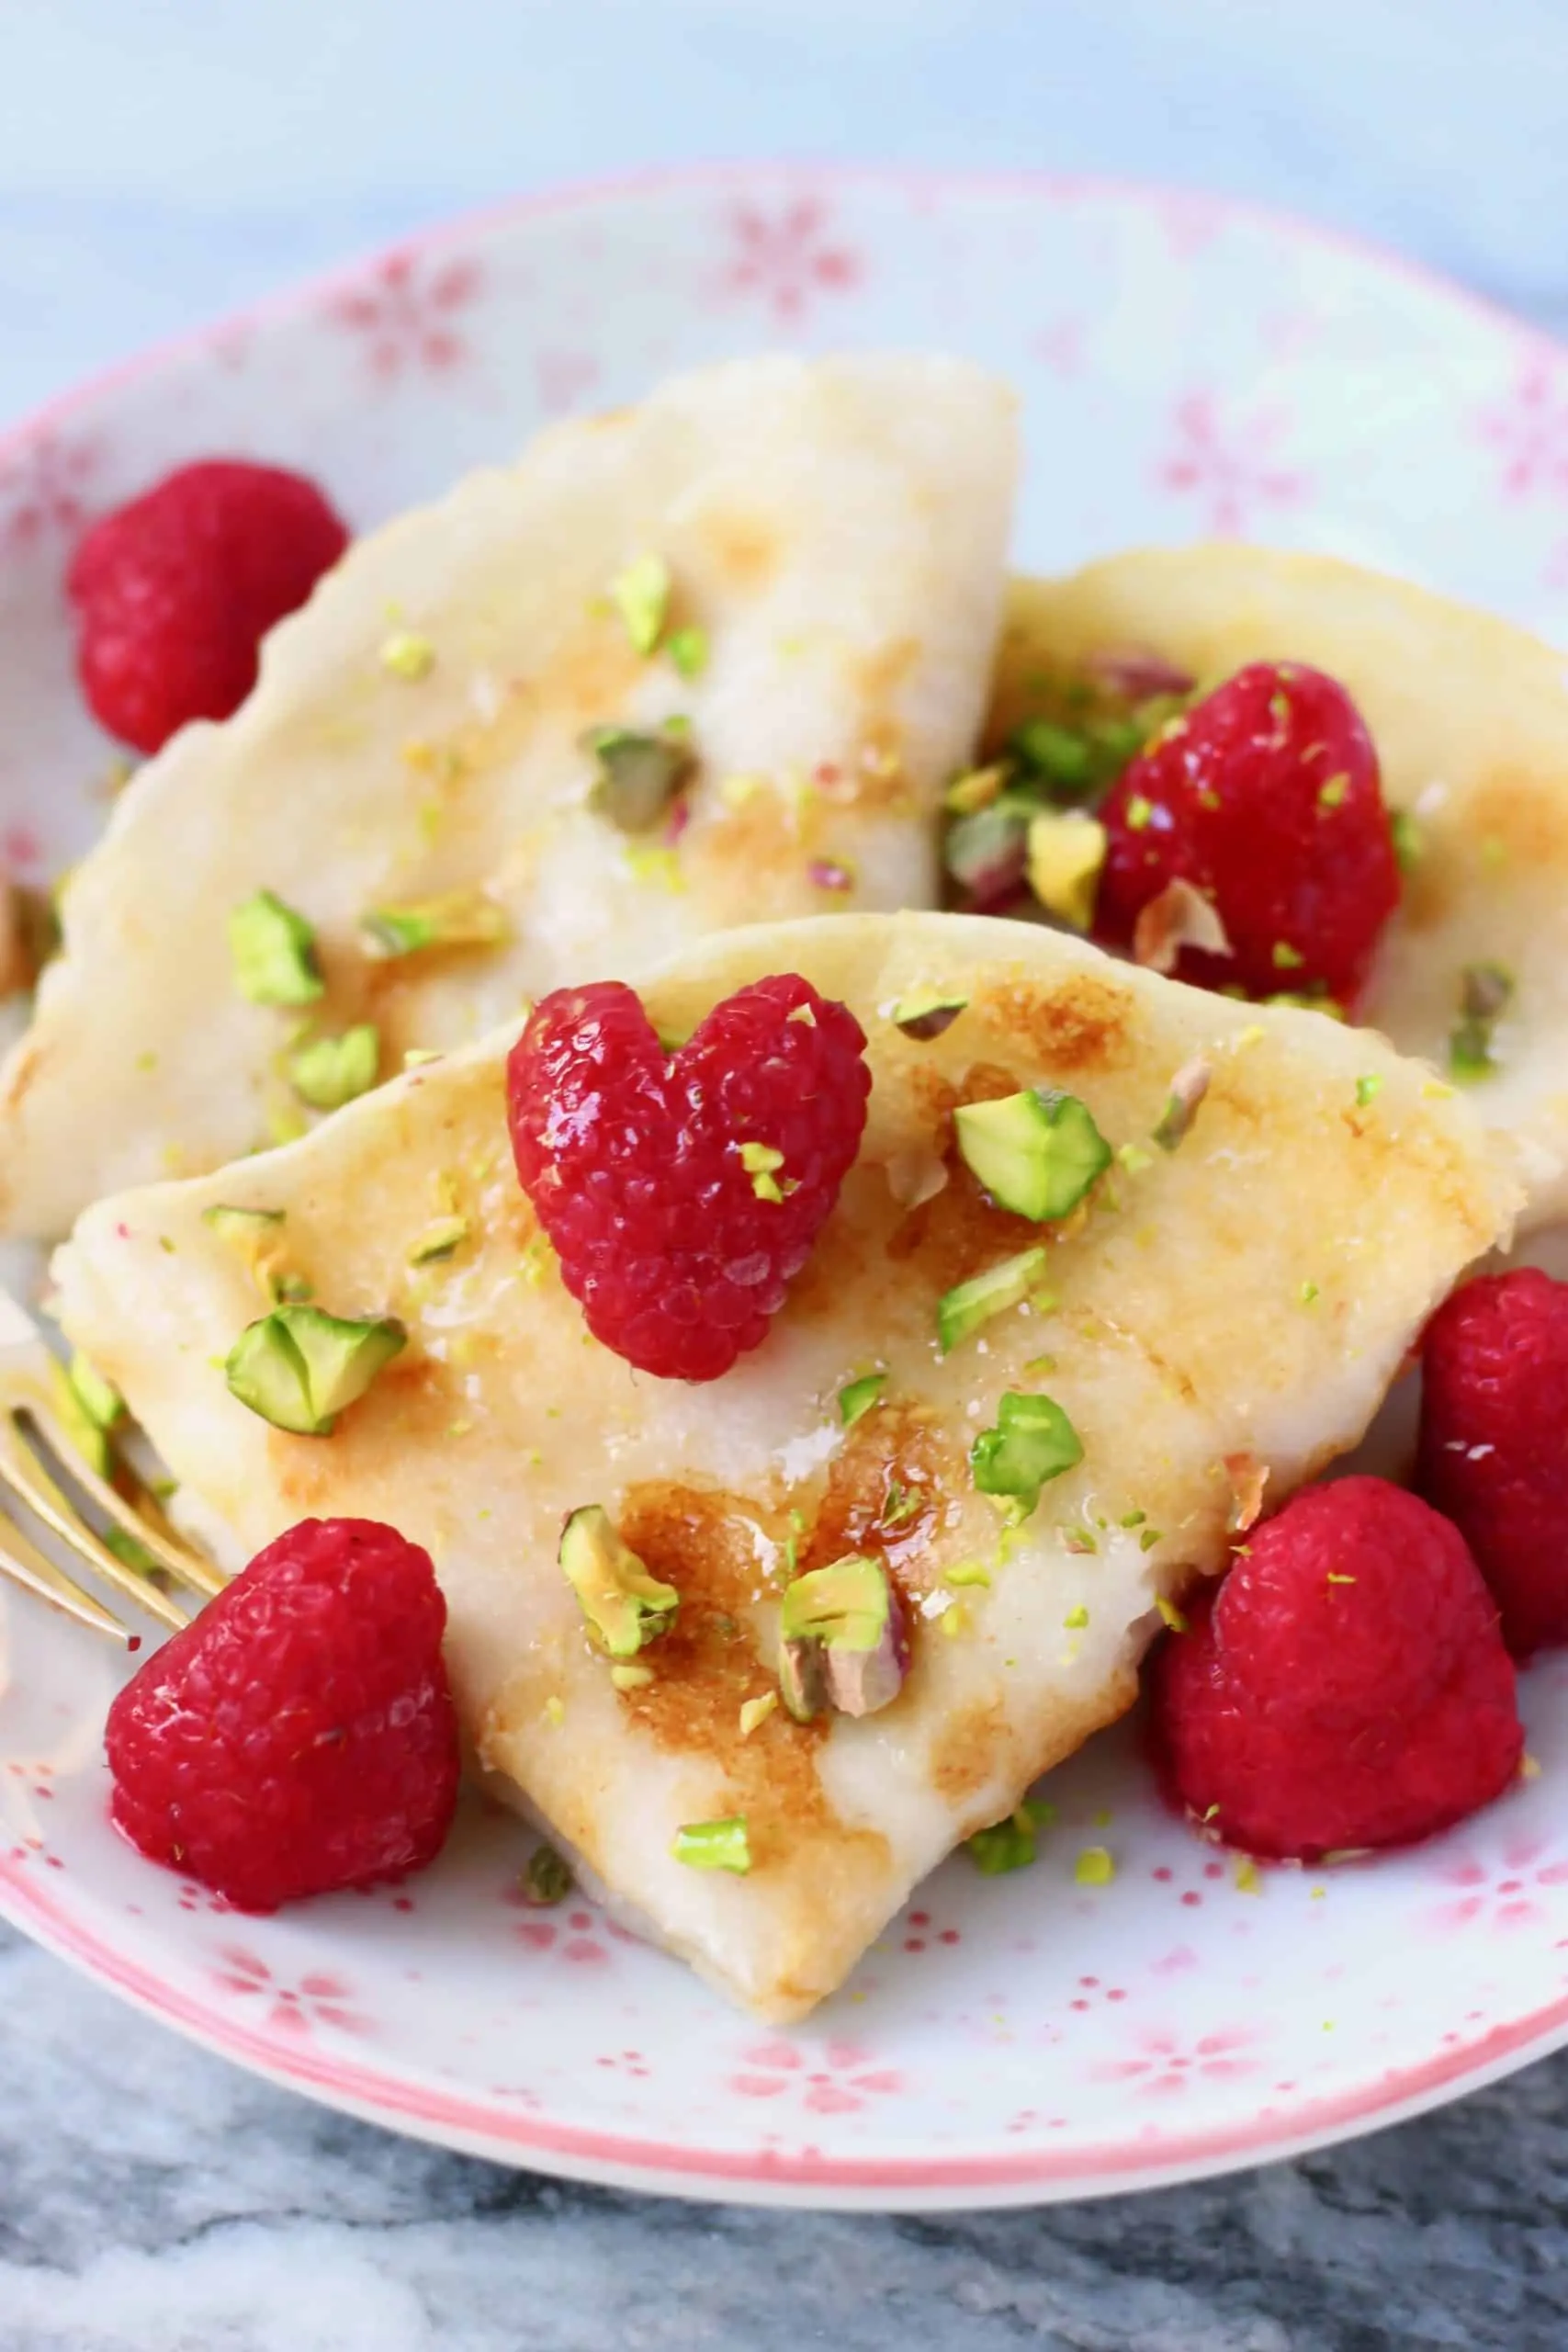 Three crepes folded into triangles decorated with raspberries